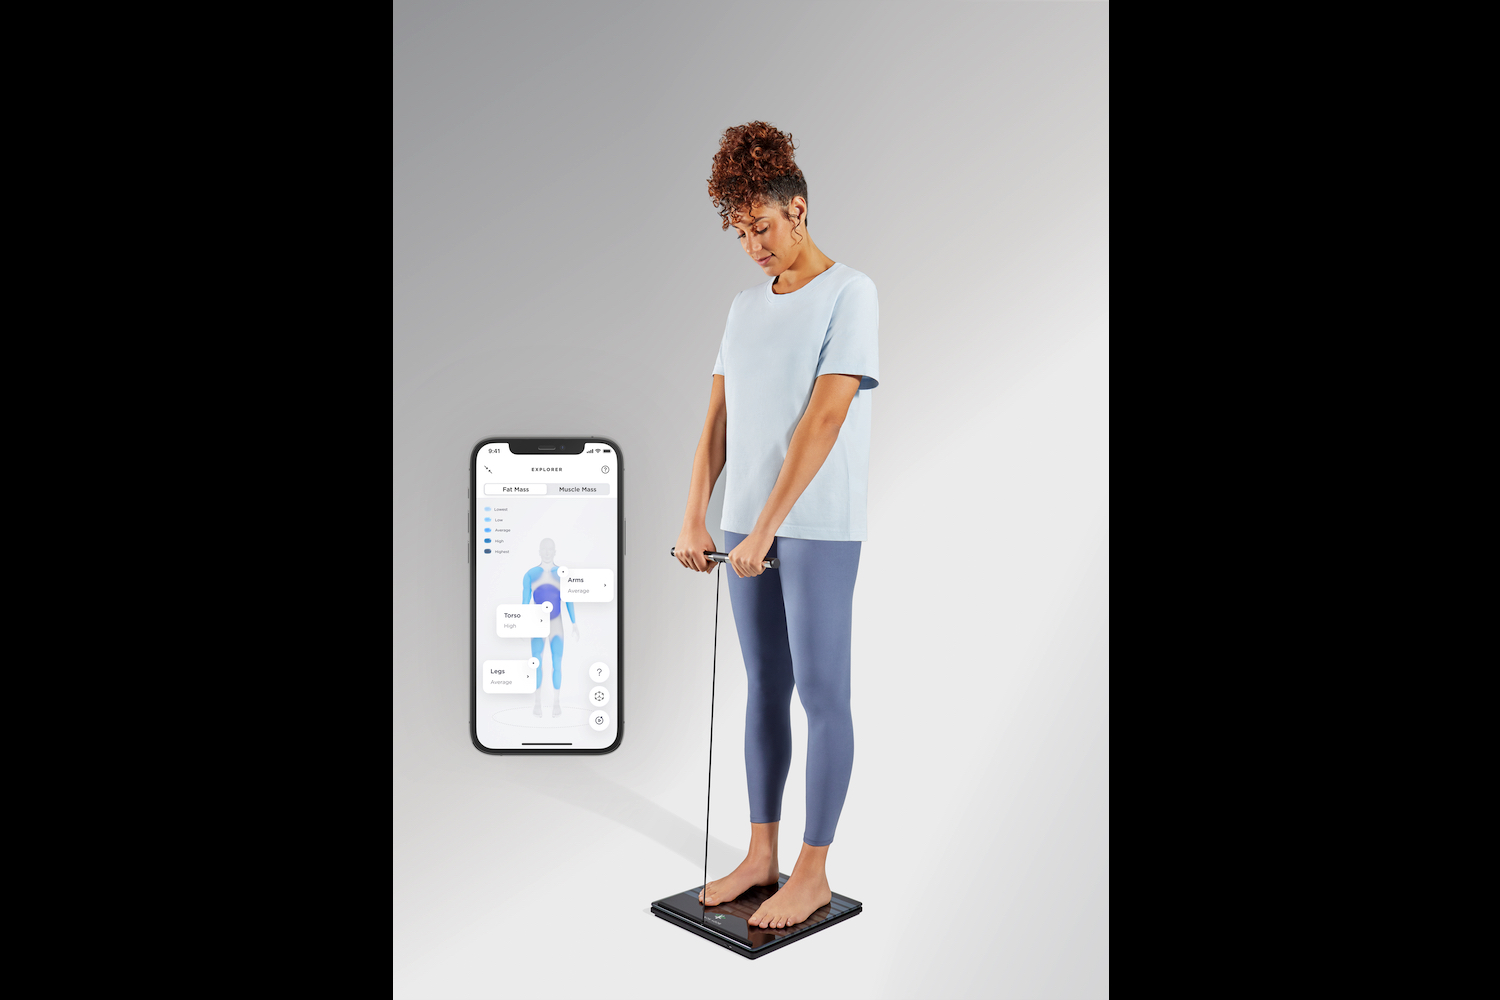 Is a Full-Body Scan a Good Stop on the Road to Wellness?